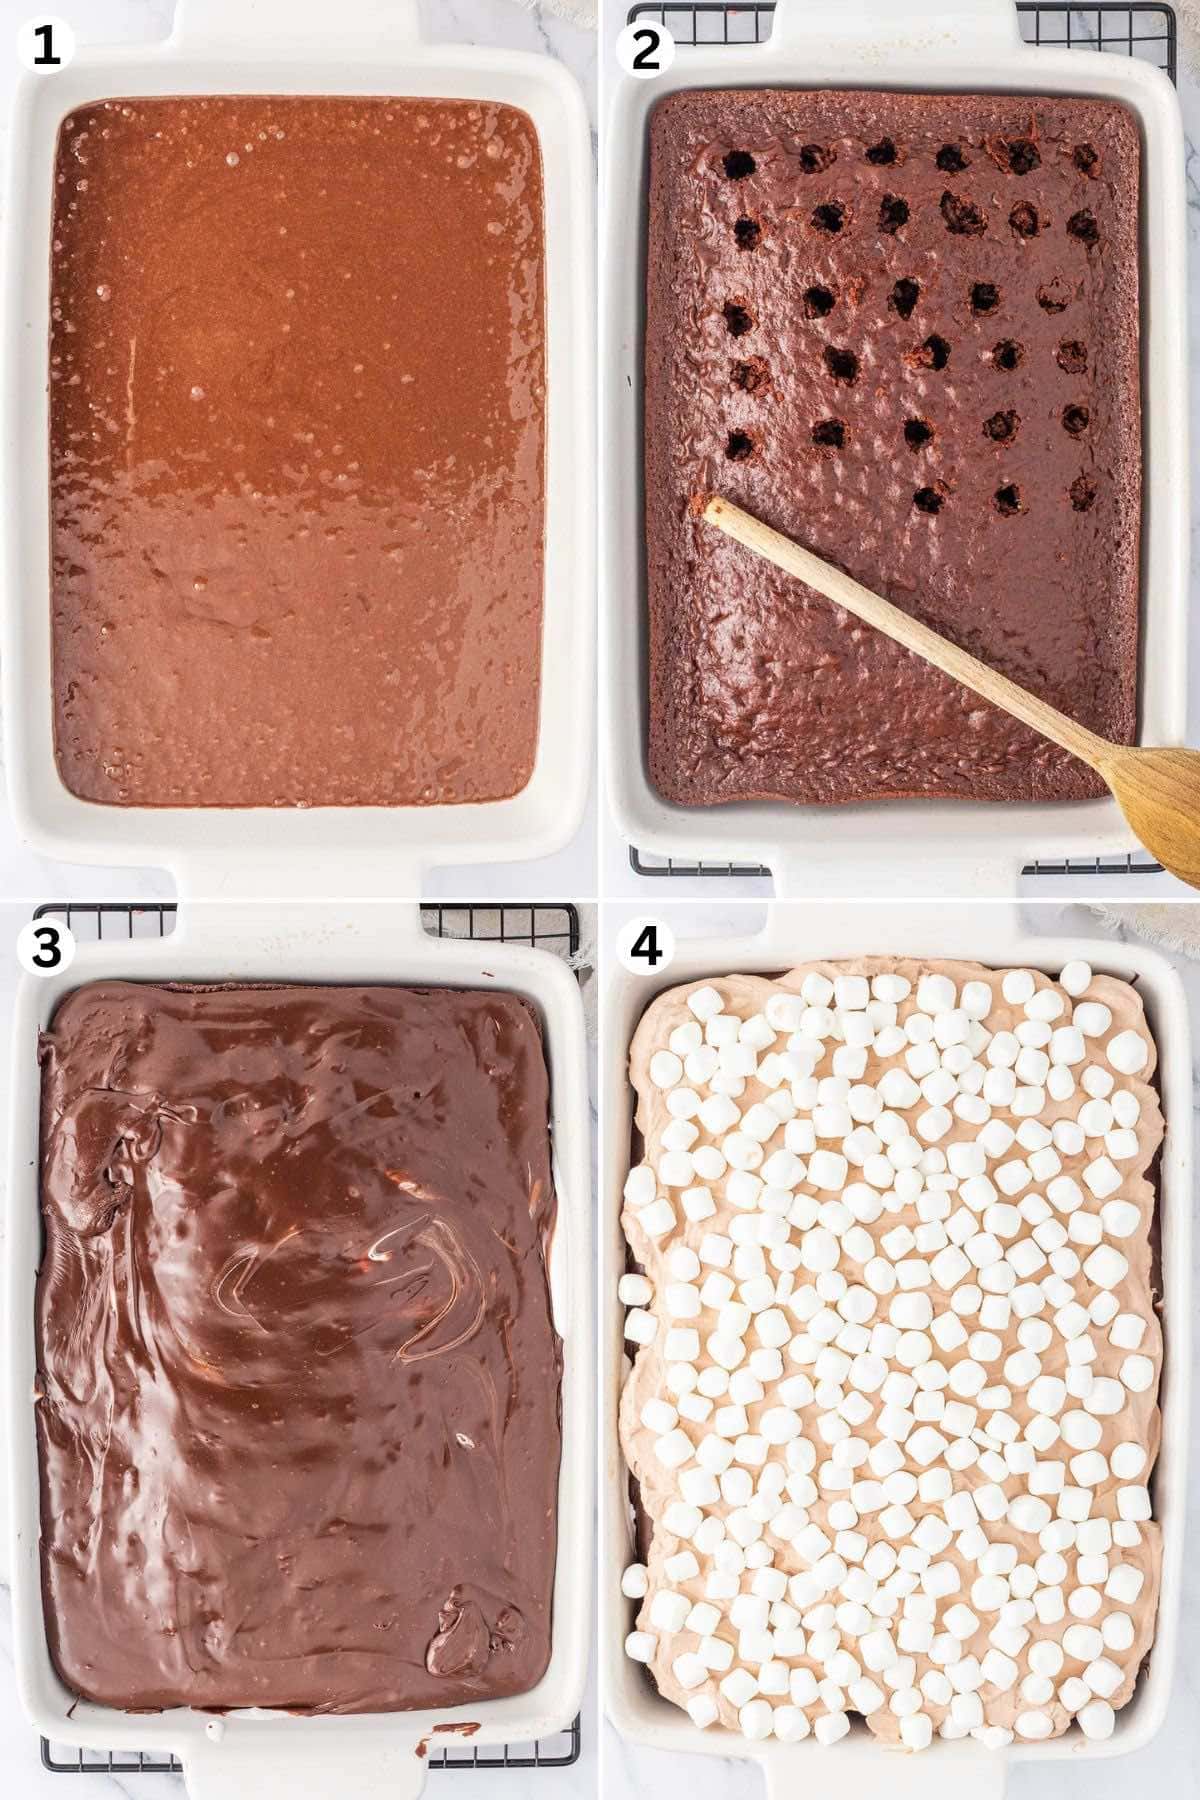 step 1. In a baking pan, mix the ingredients.
step 2. Poke large holes all over the cake using the handle of wooden spoon.
step 3. Spread the fudge filling over the cake.
step 4. Pour the whipped topping over the cake and garnish with marshmallows.